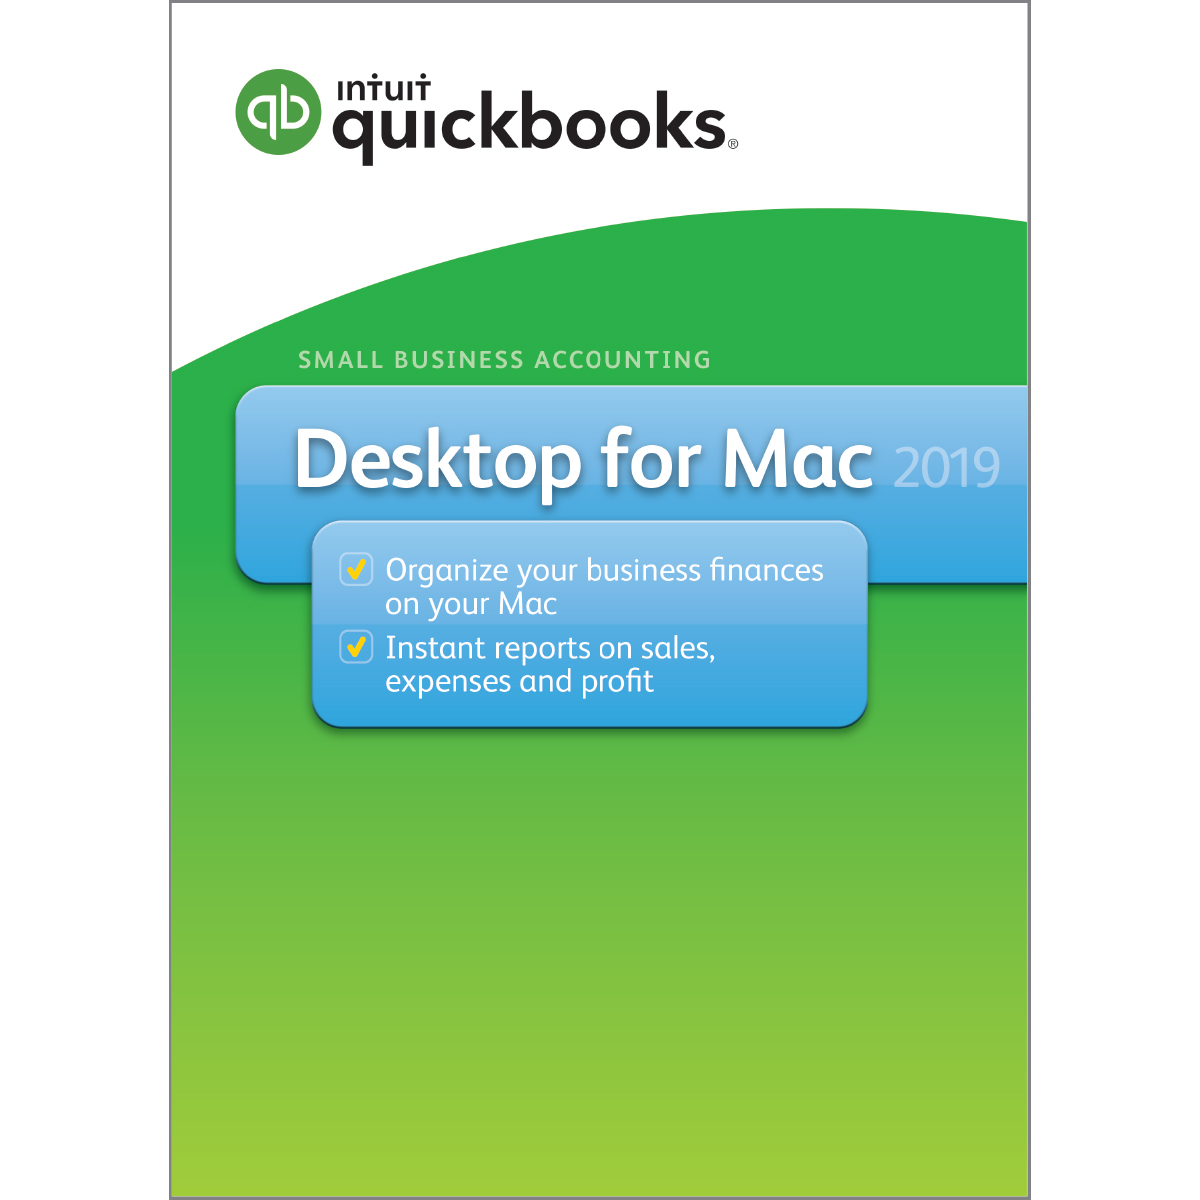 should i buy quickbooks for mac 2016 or 2019